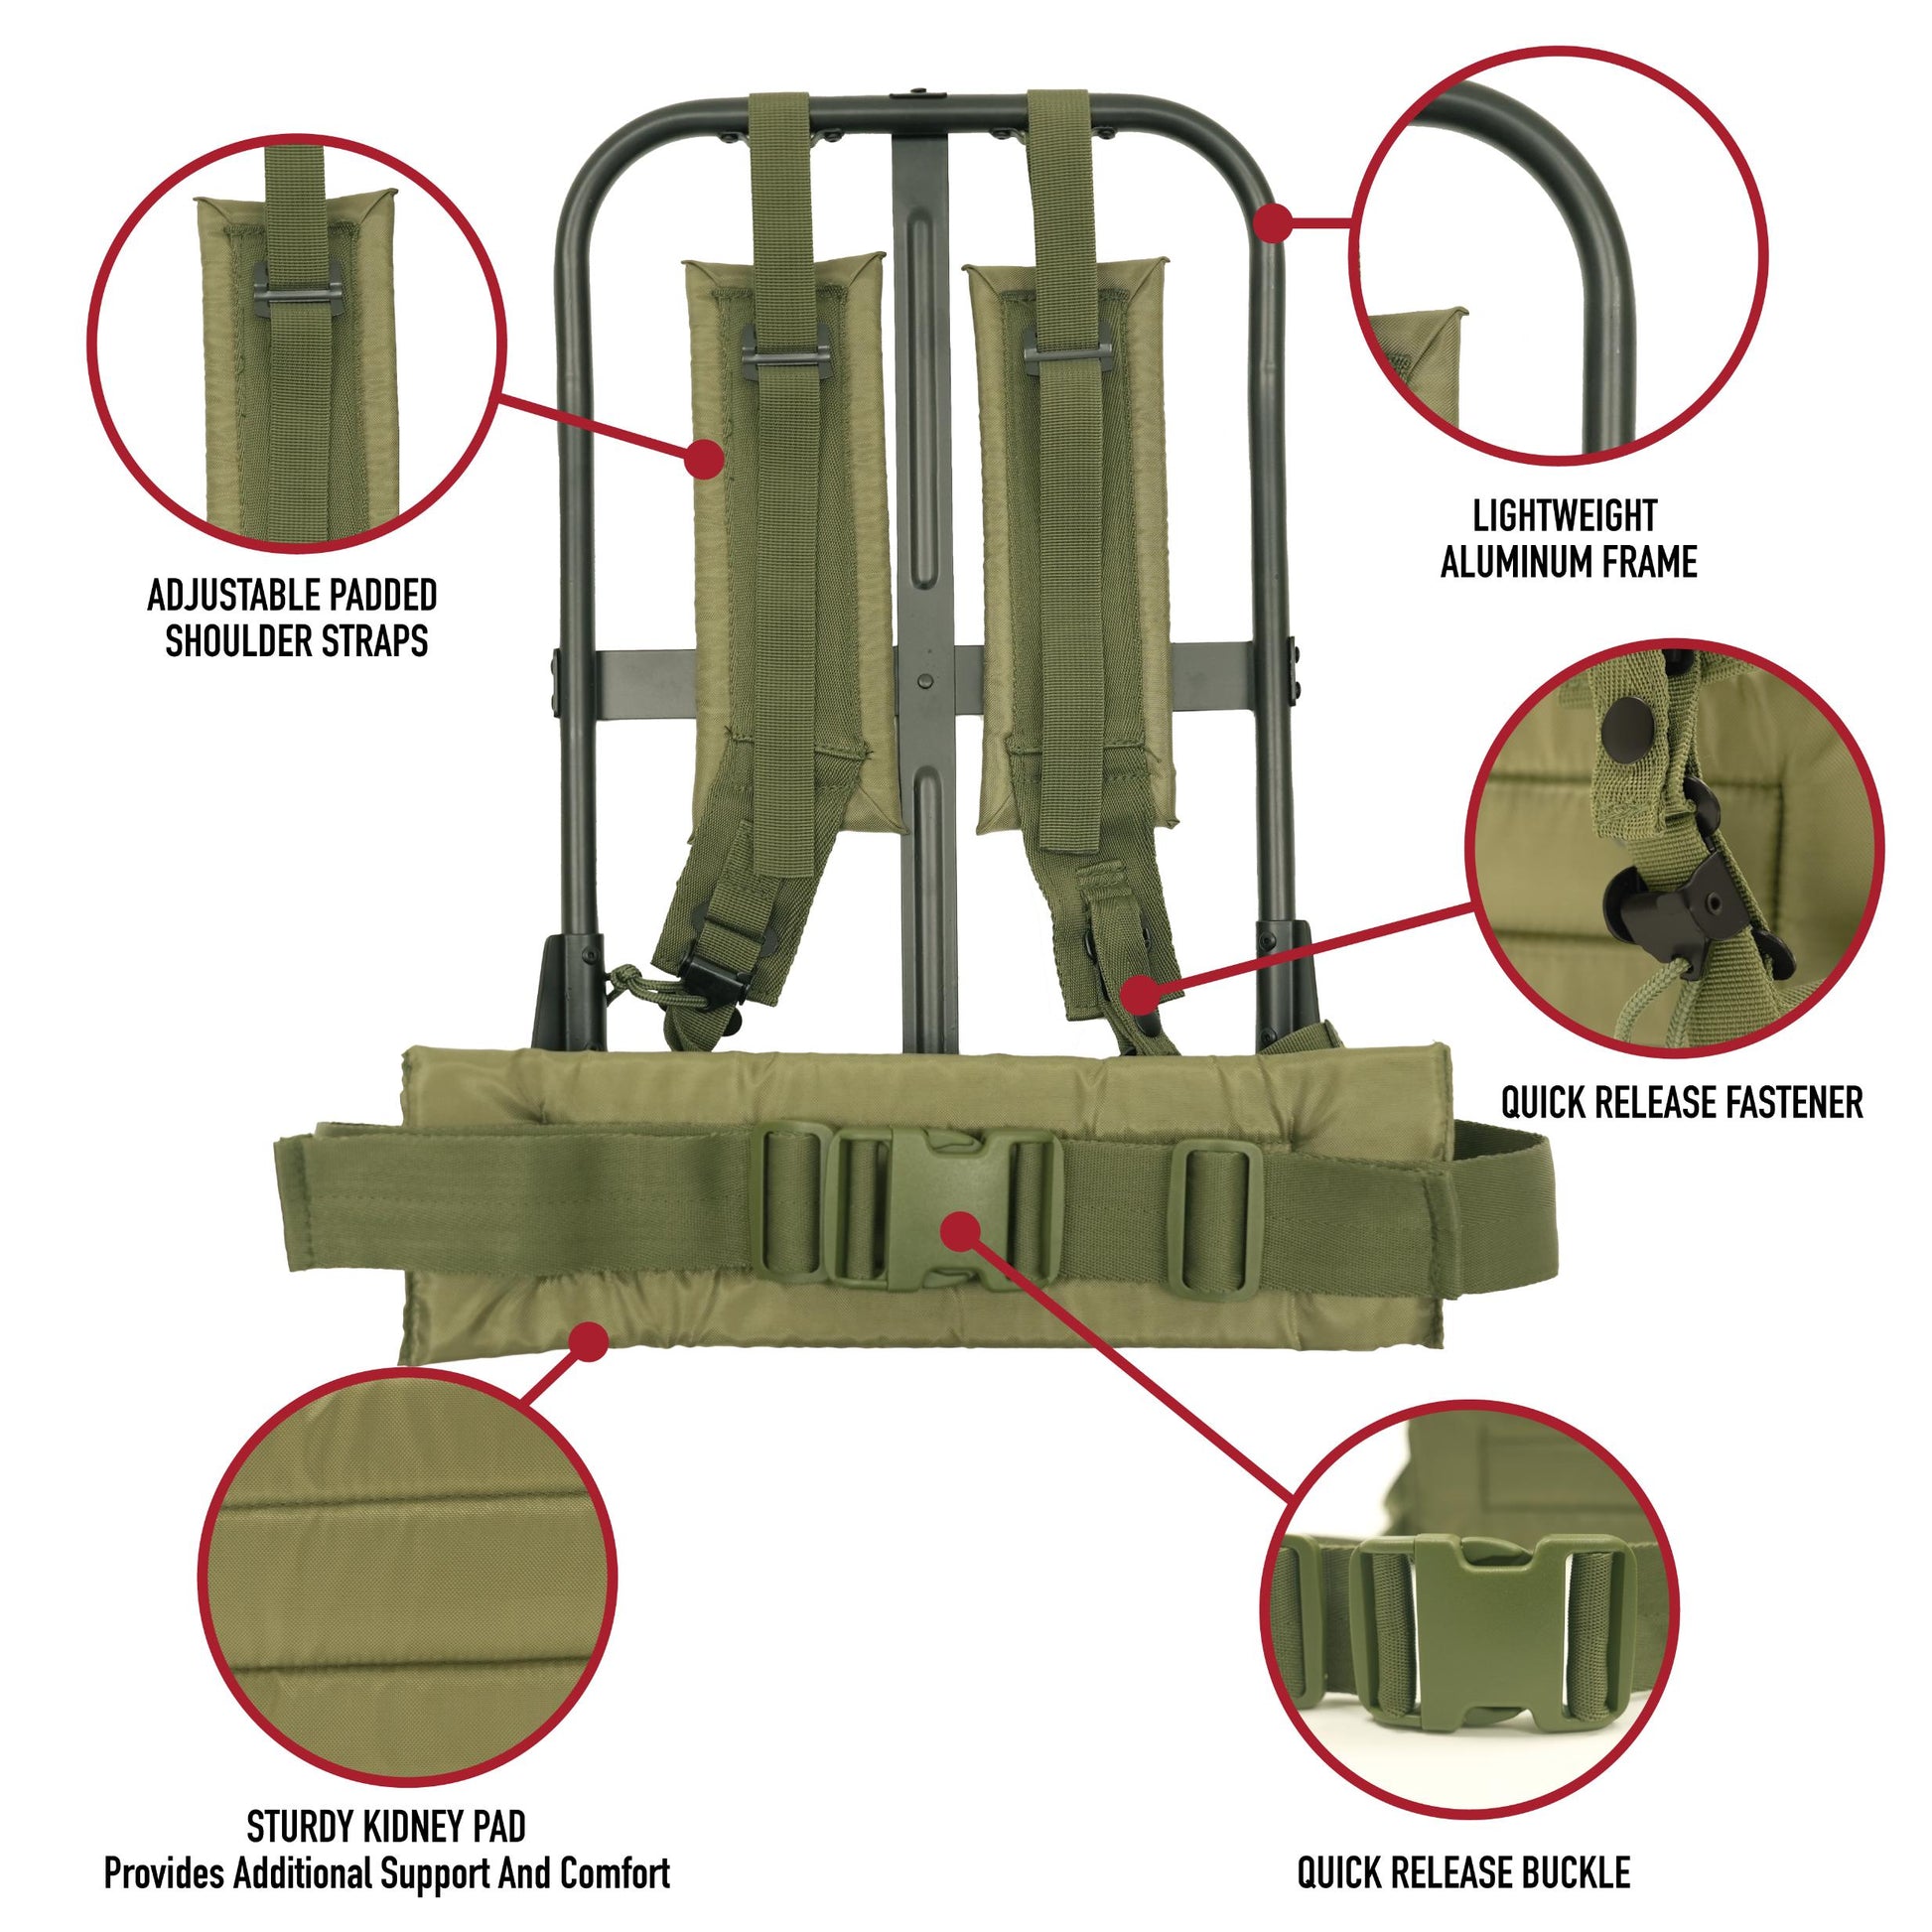 Rothco Alice Pack Frame with Attachments - Tactical Choice Plus